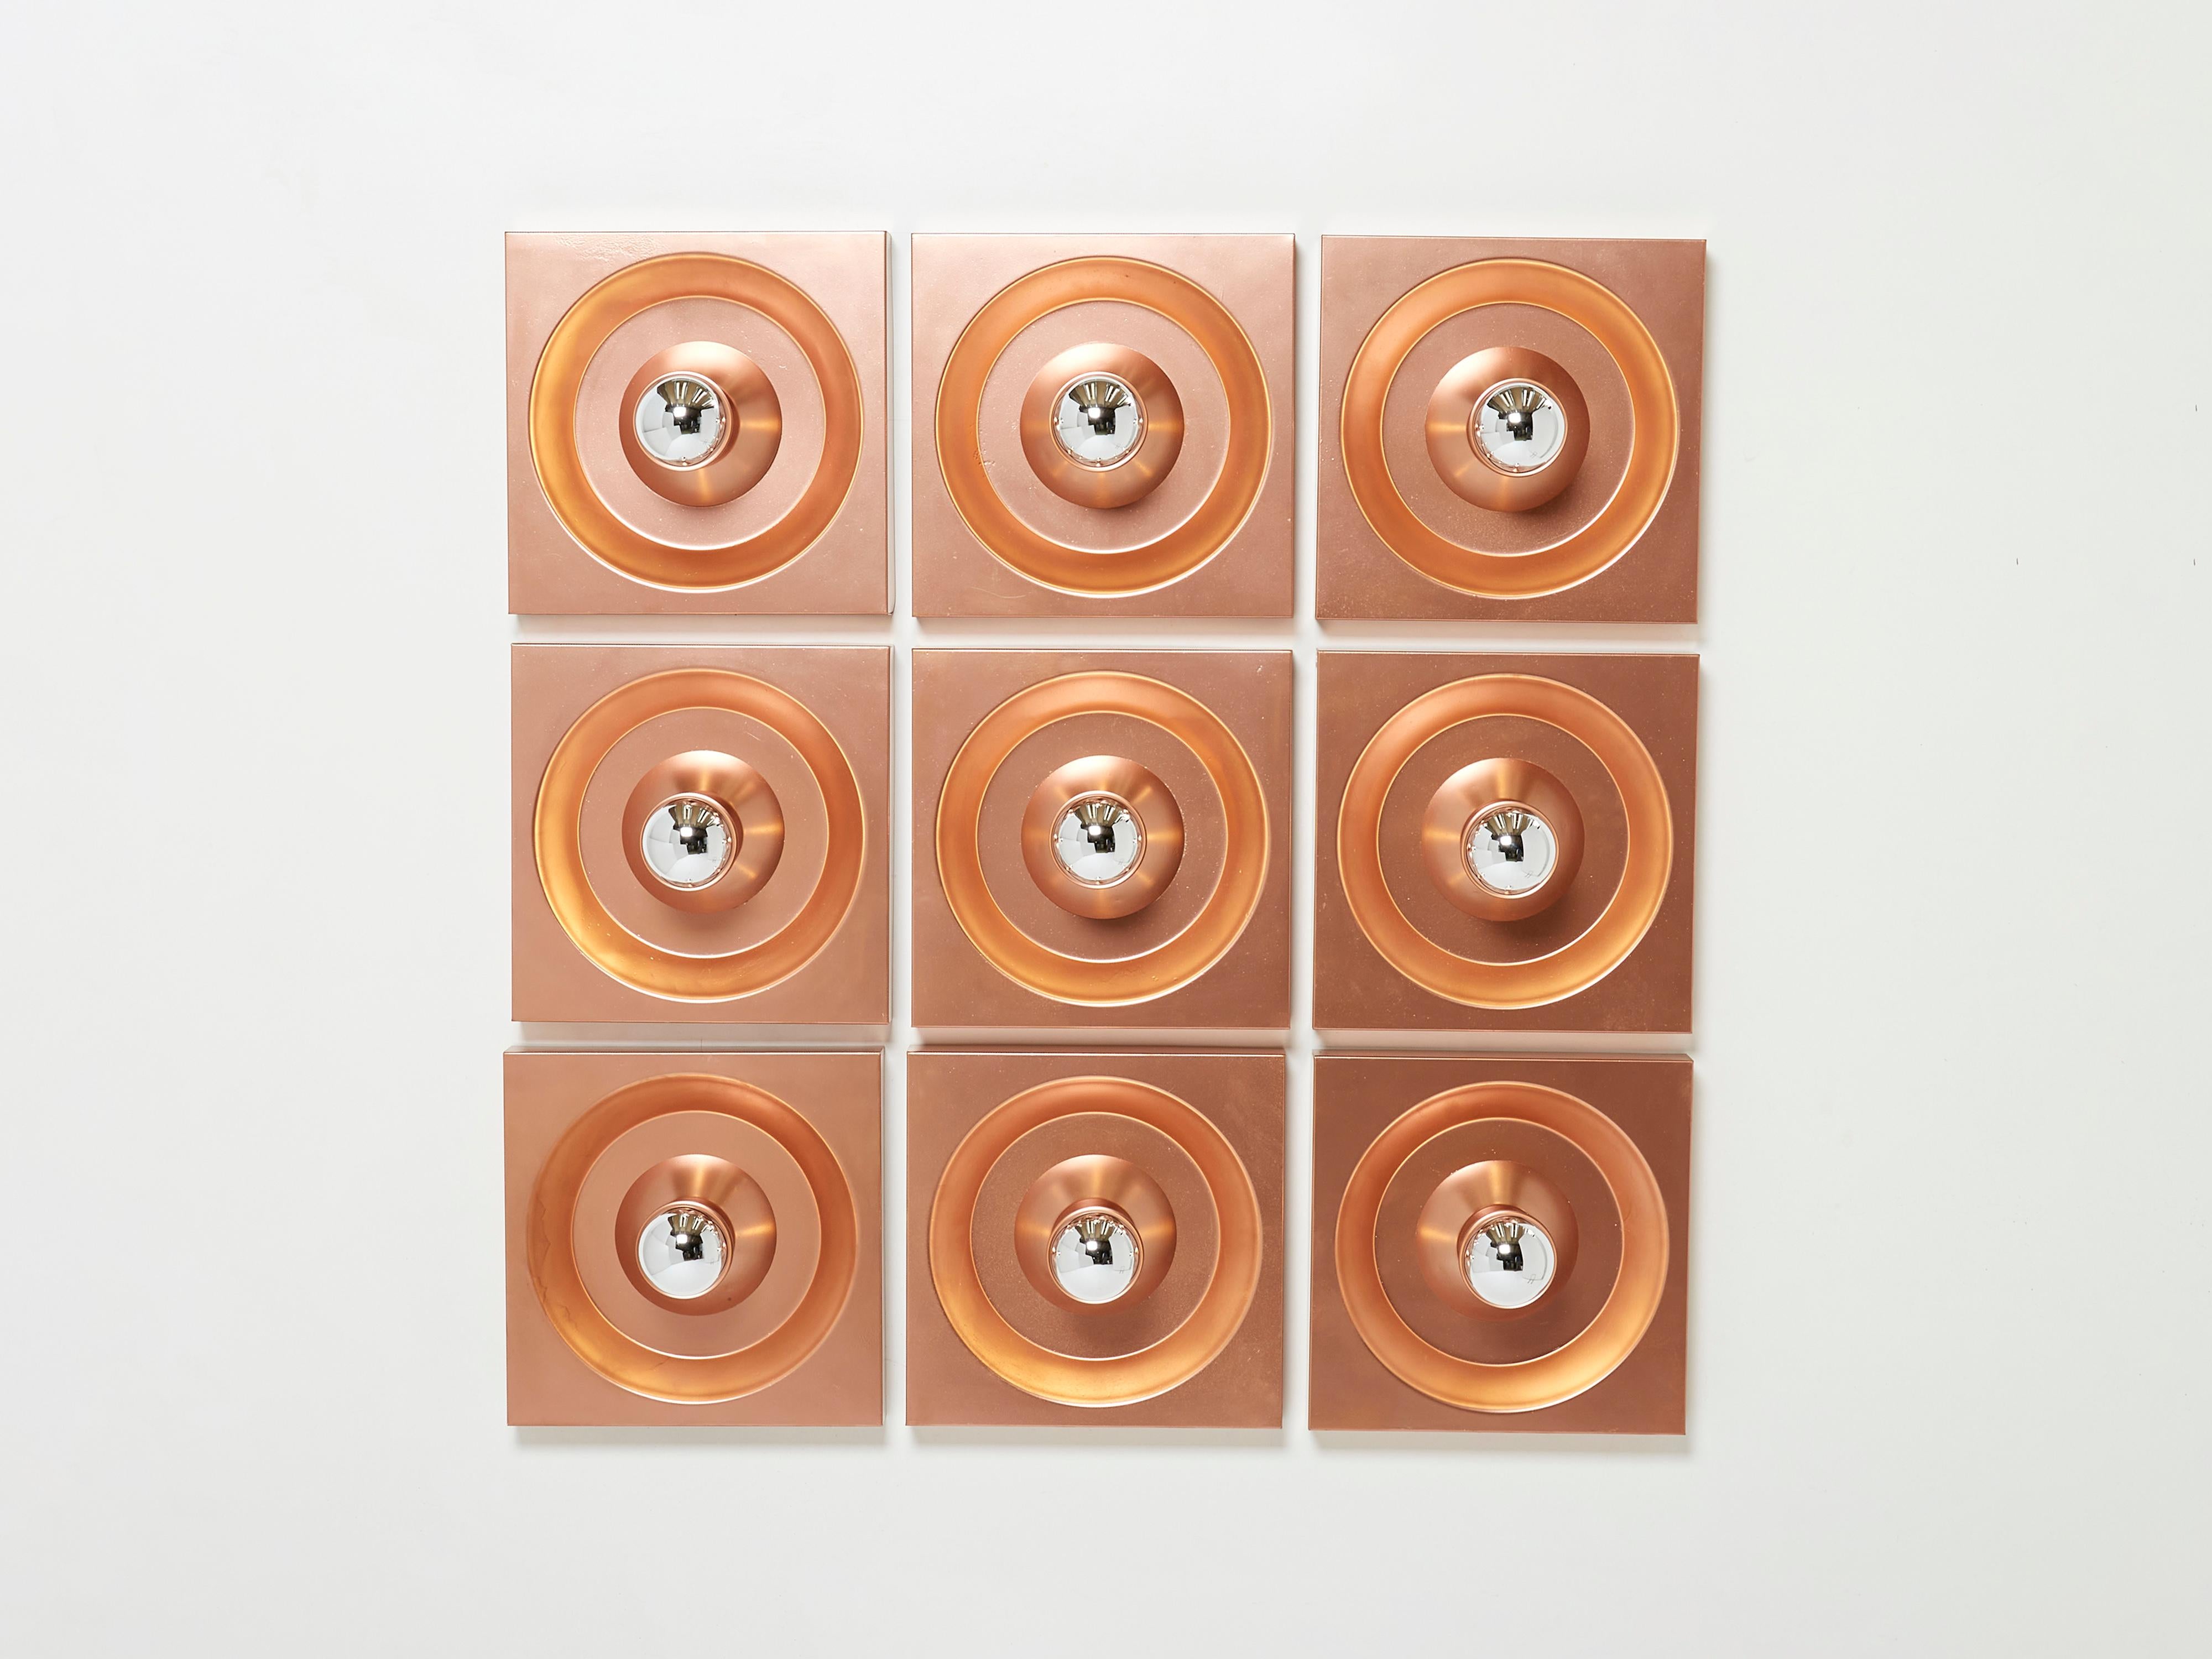 This is a rare set of 9 original copper coating wall lights designed by Klaus Hempel and produced by Kaiser Leuchtenin in Germany in the 1960s and 1970s. These are early 1970s examples. The structure is made of solid metal wich is copper coated.